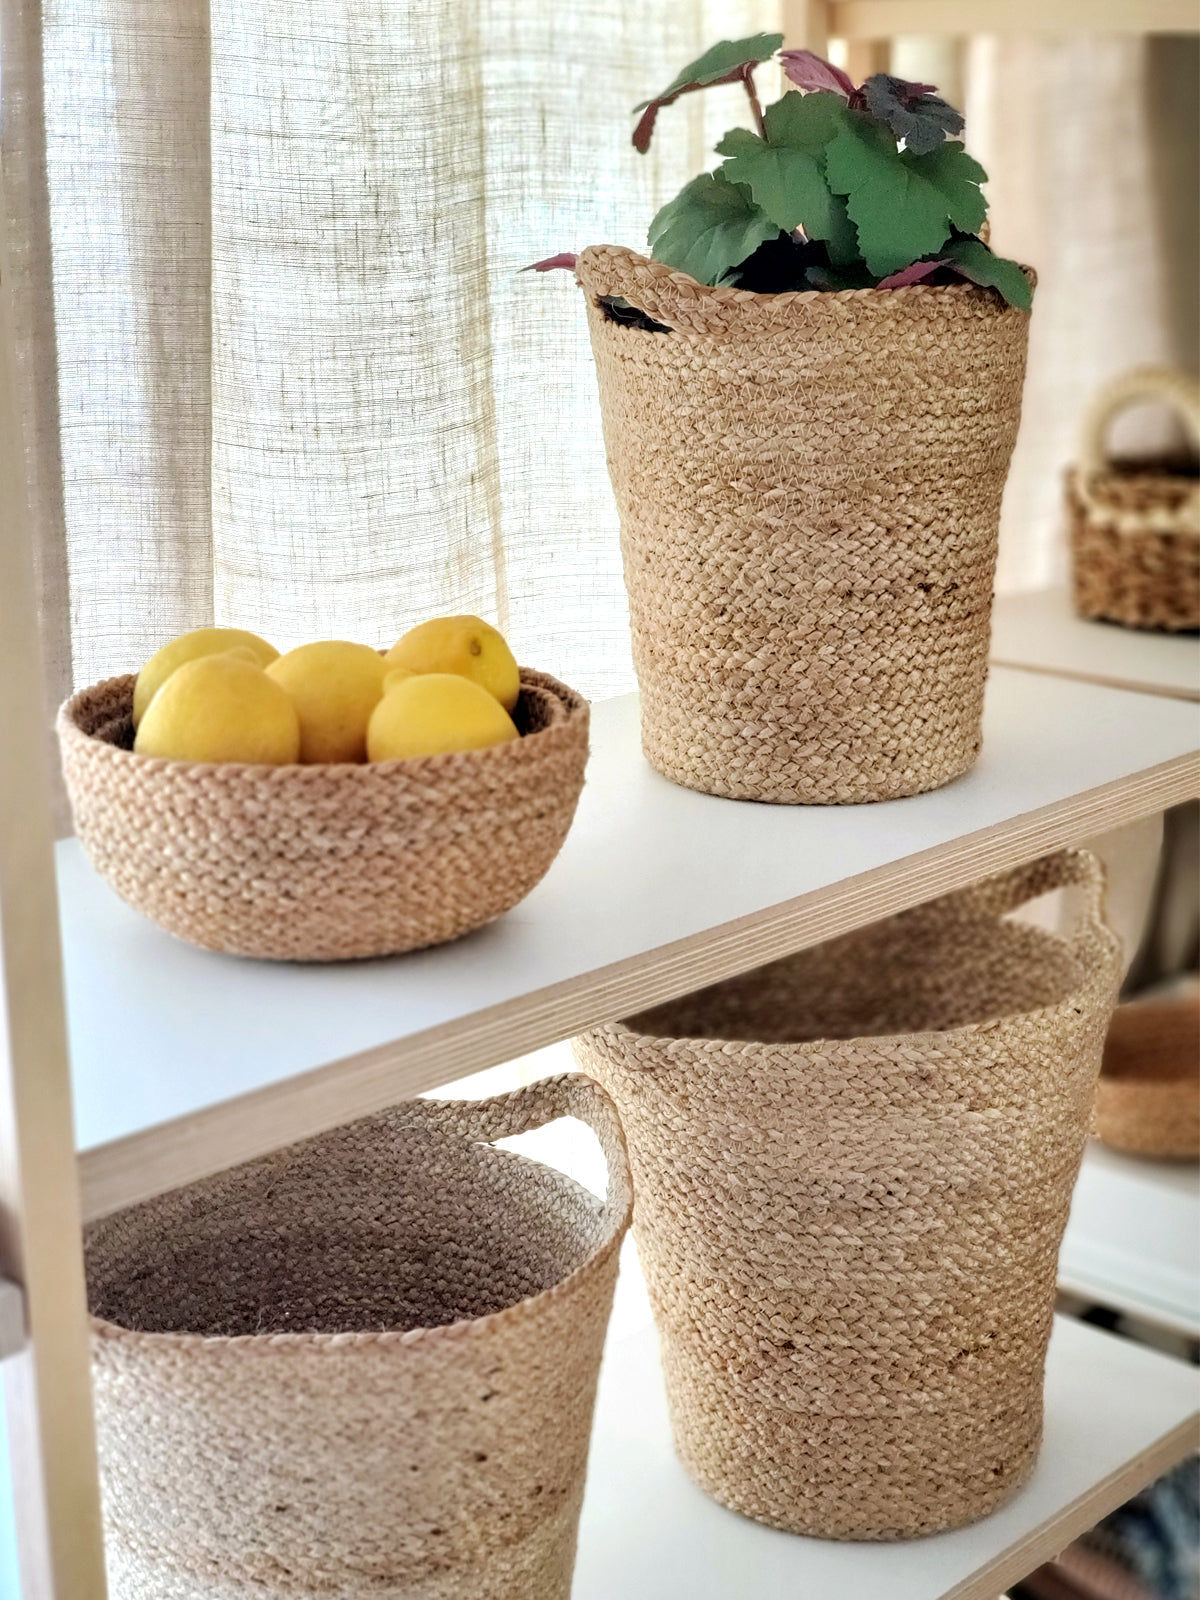 Kata Candy Bowl - Natural (Set of 4) are made with 100% natural raw jute - hand-dyed with natural color dye.